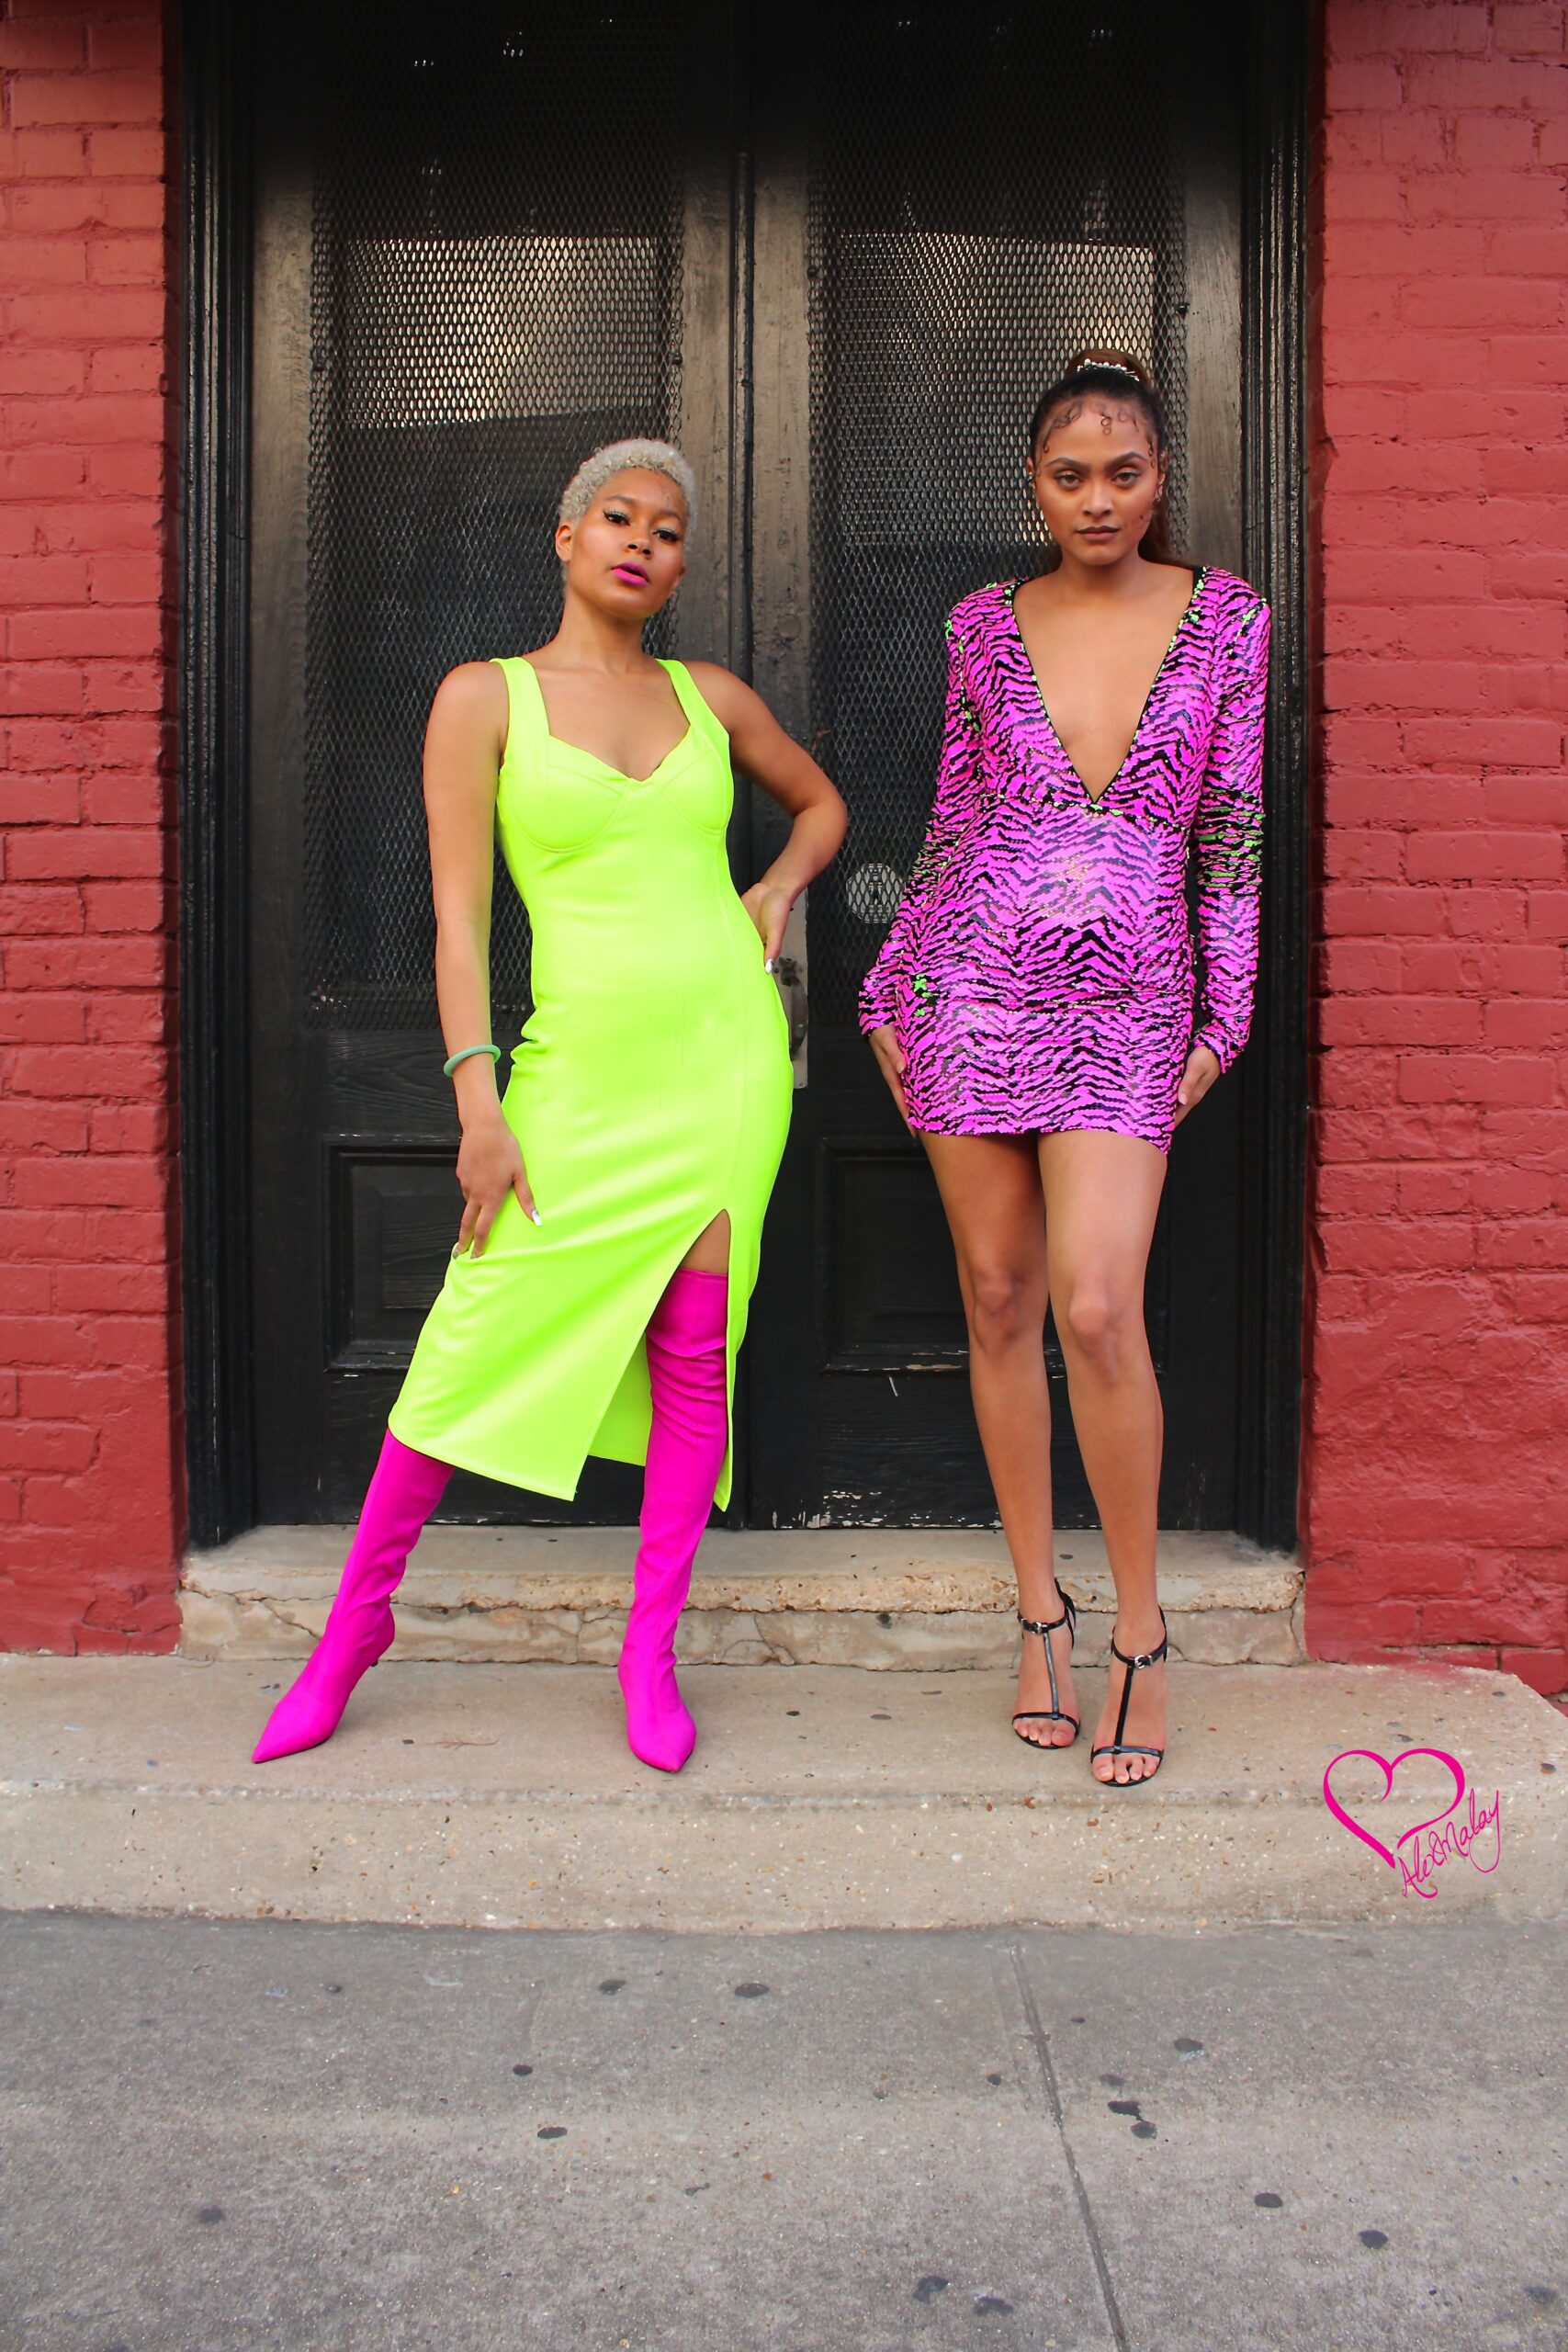 Neon Pink to Neon Green Reversible Sequin Dress - Alex Malay